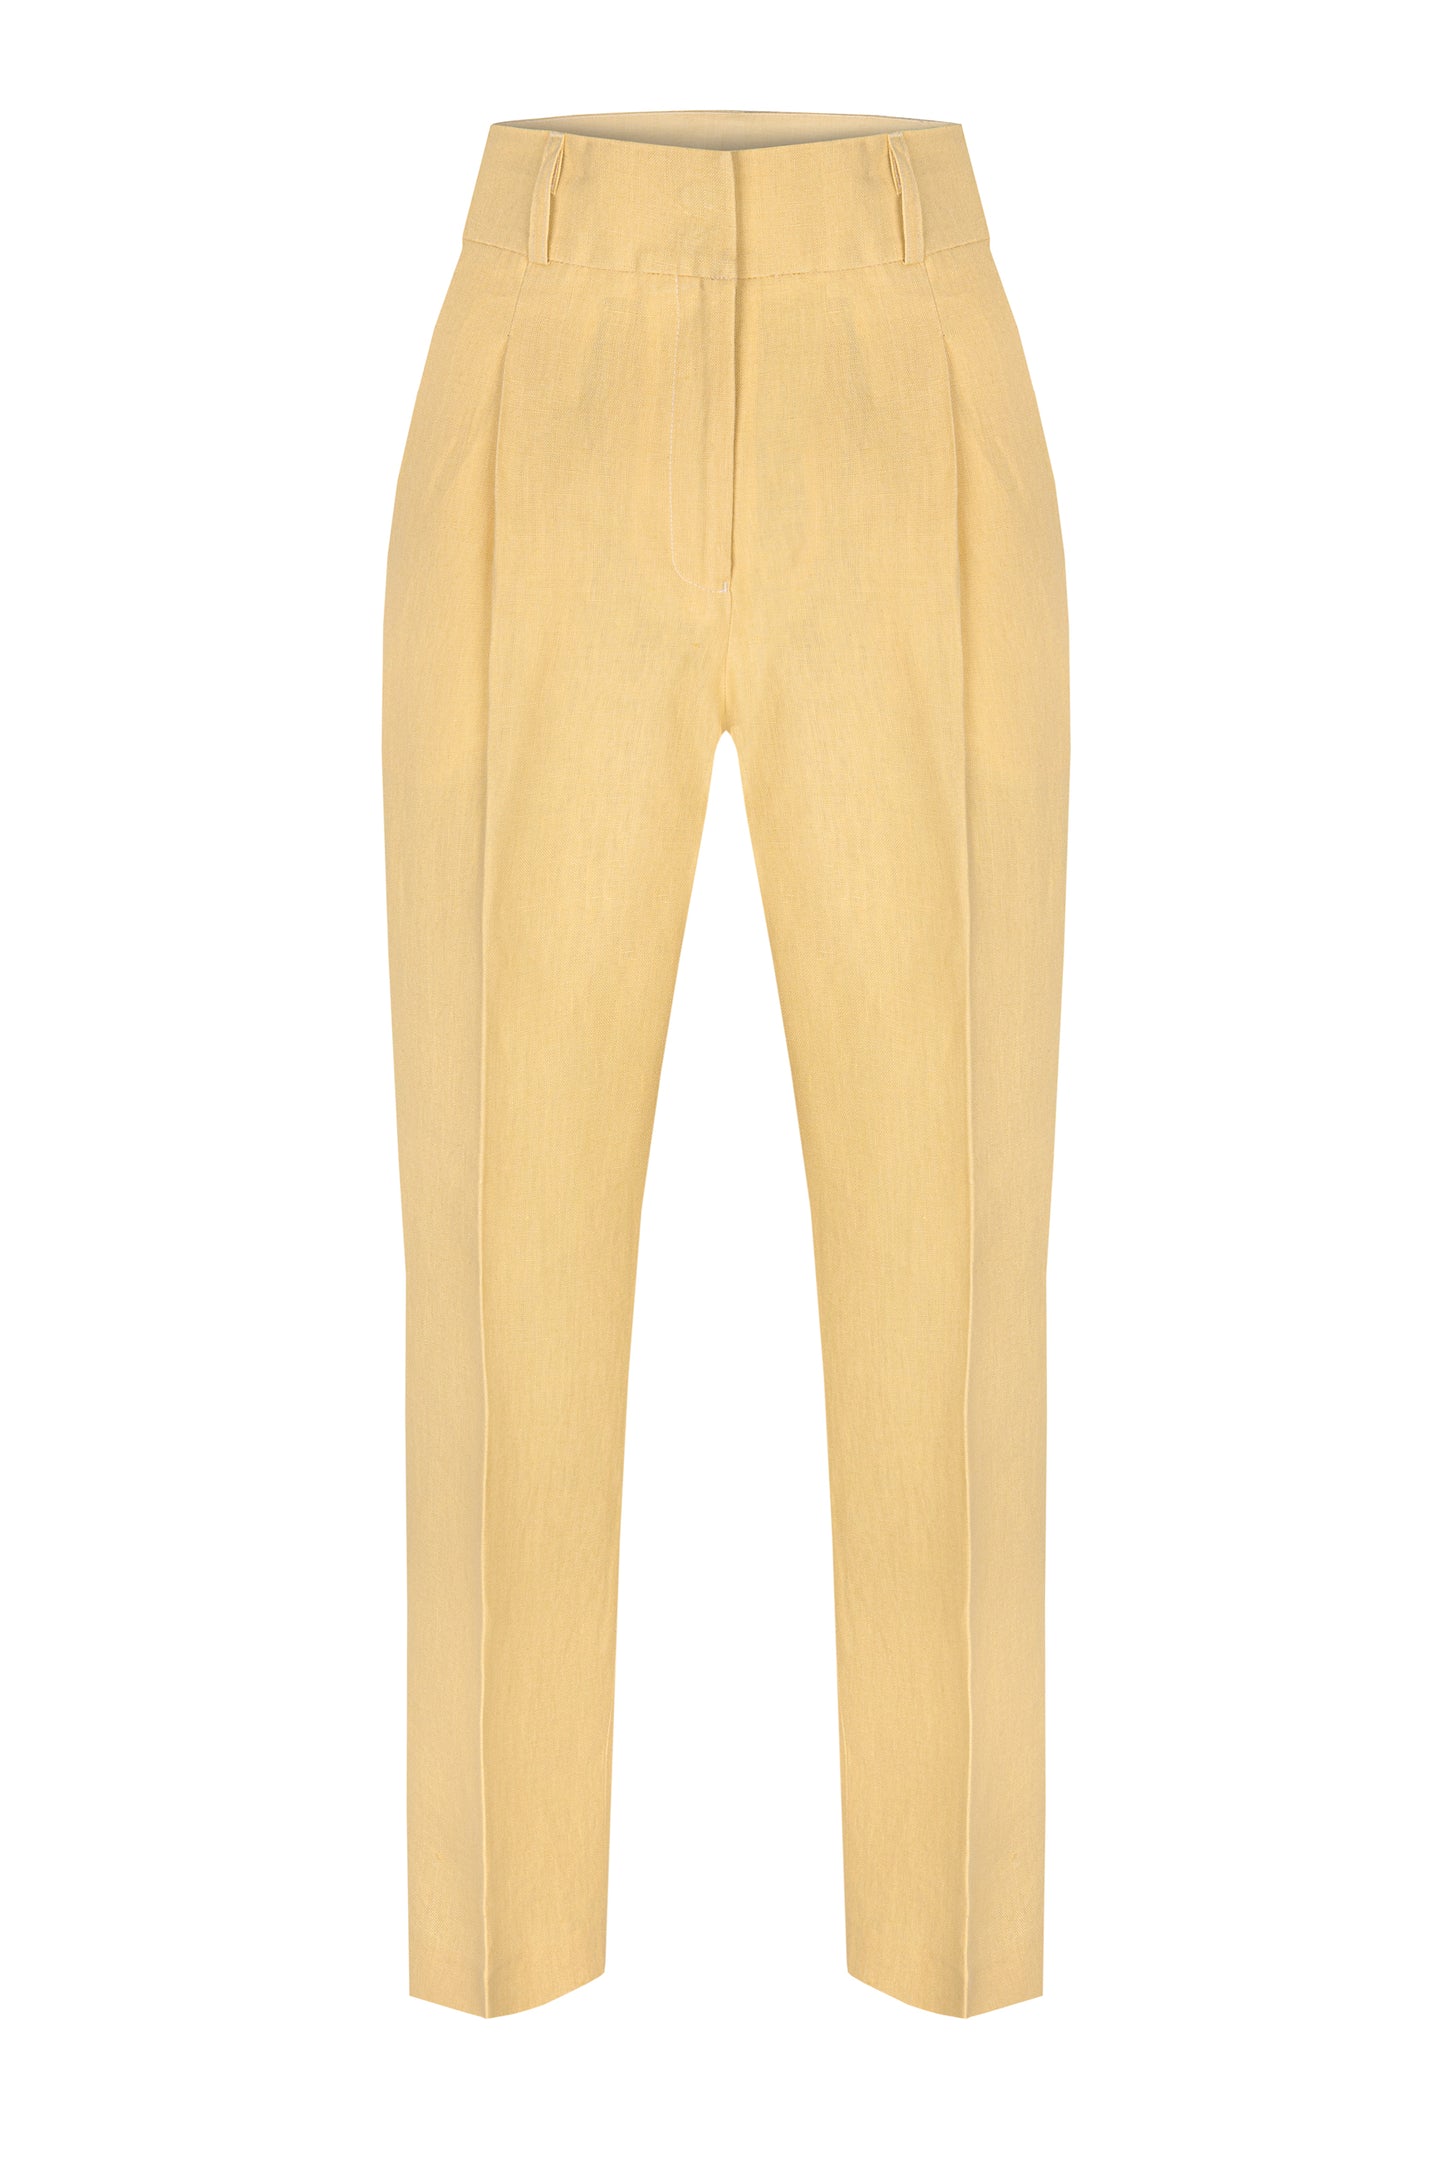 Women tailored linen trousers with high rise, wide leg linen trousers for women